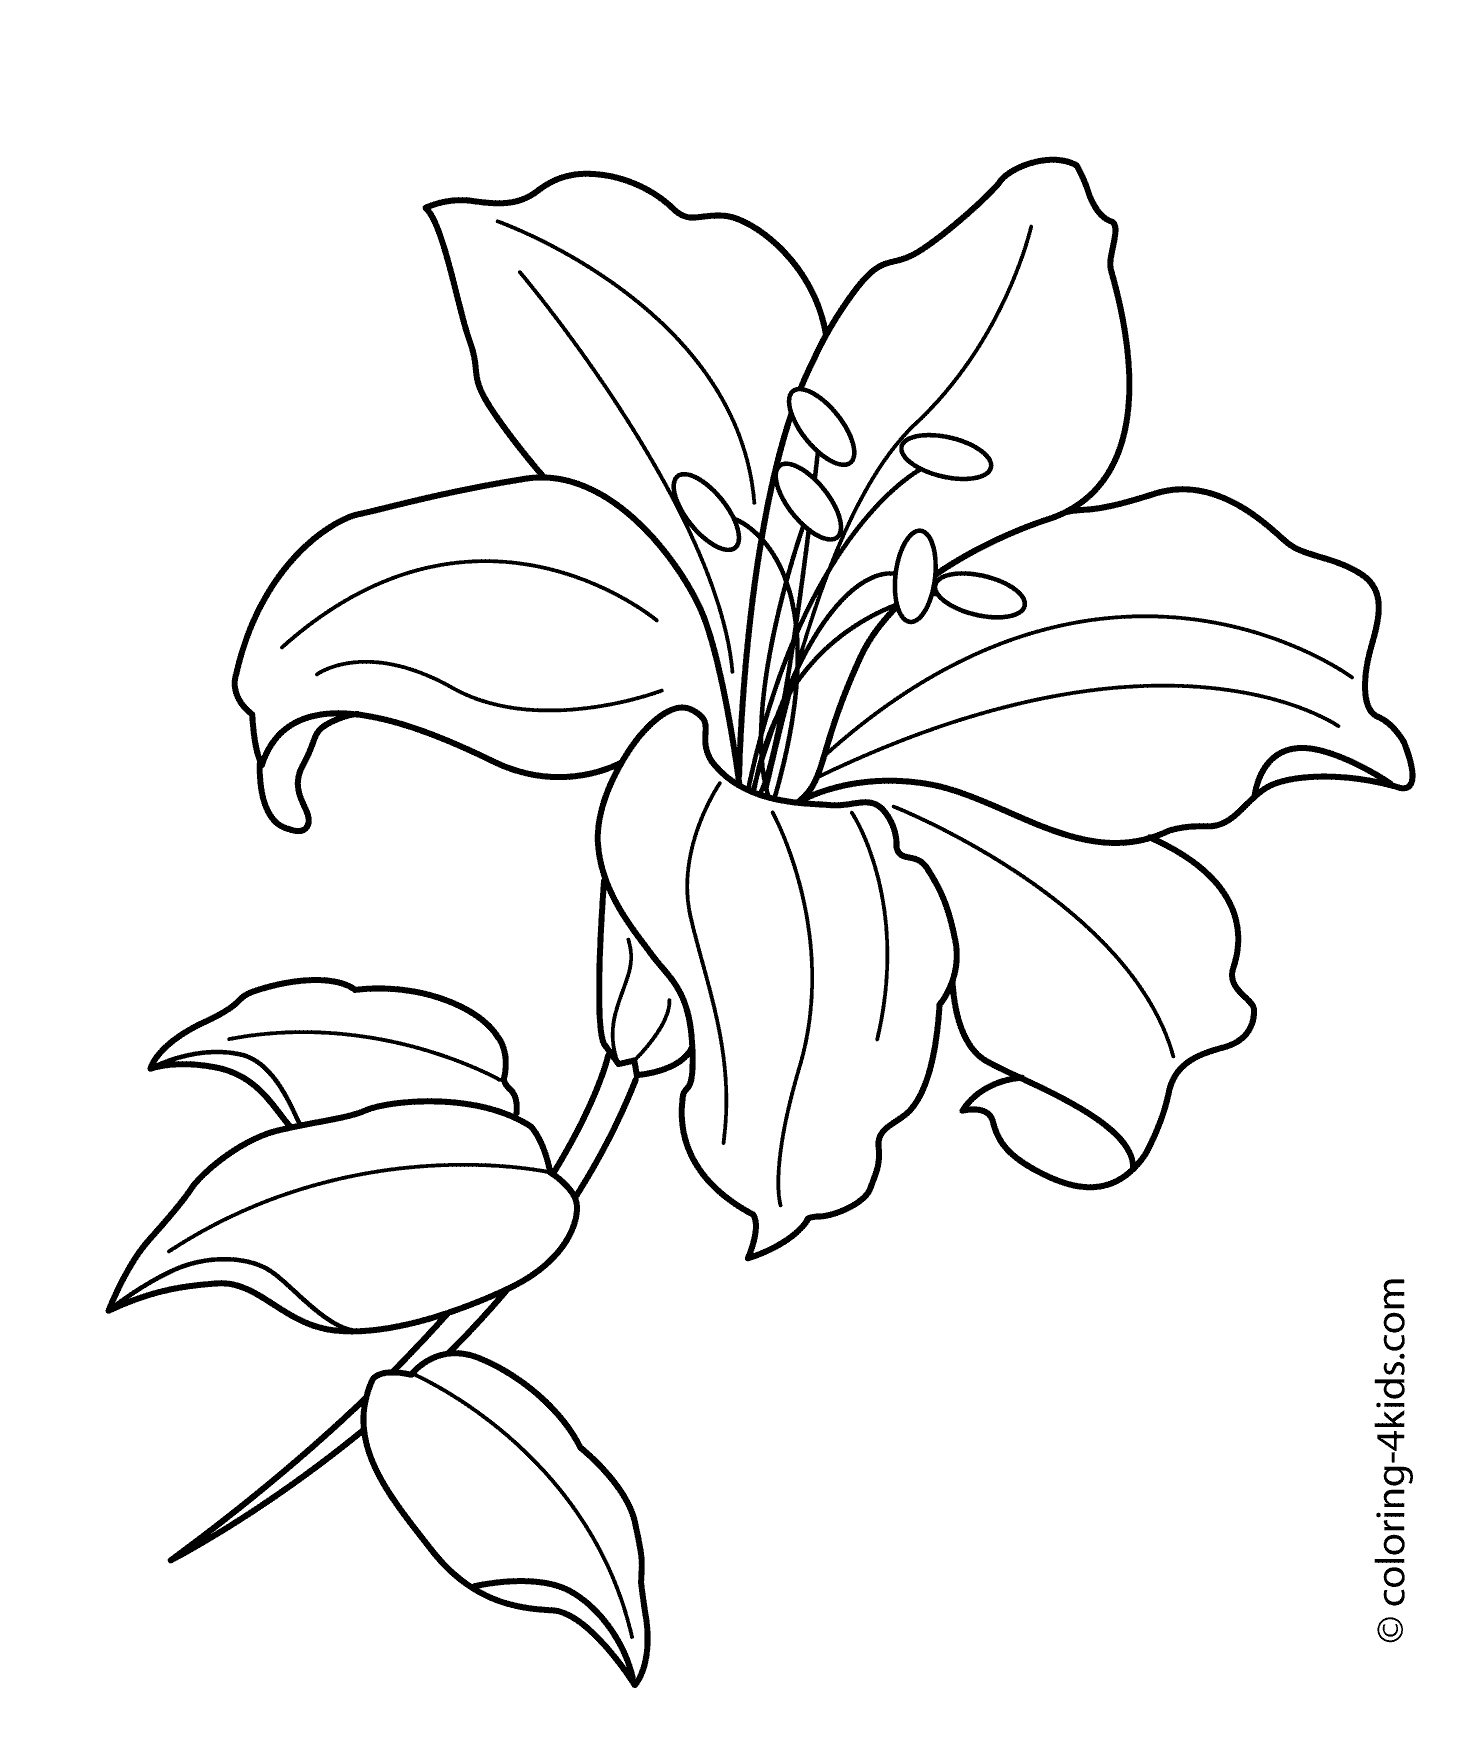 White Rain Lily coloring #14, Download drawings